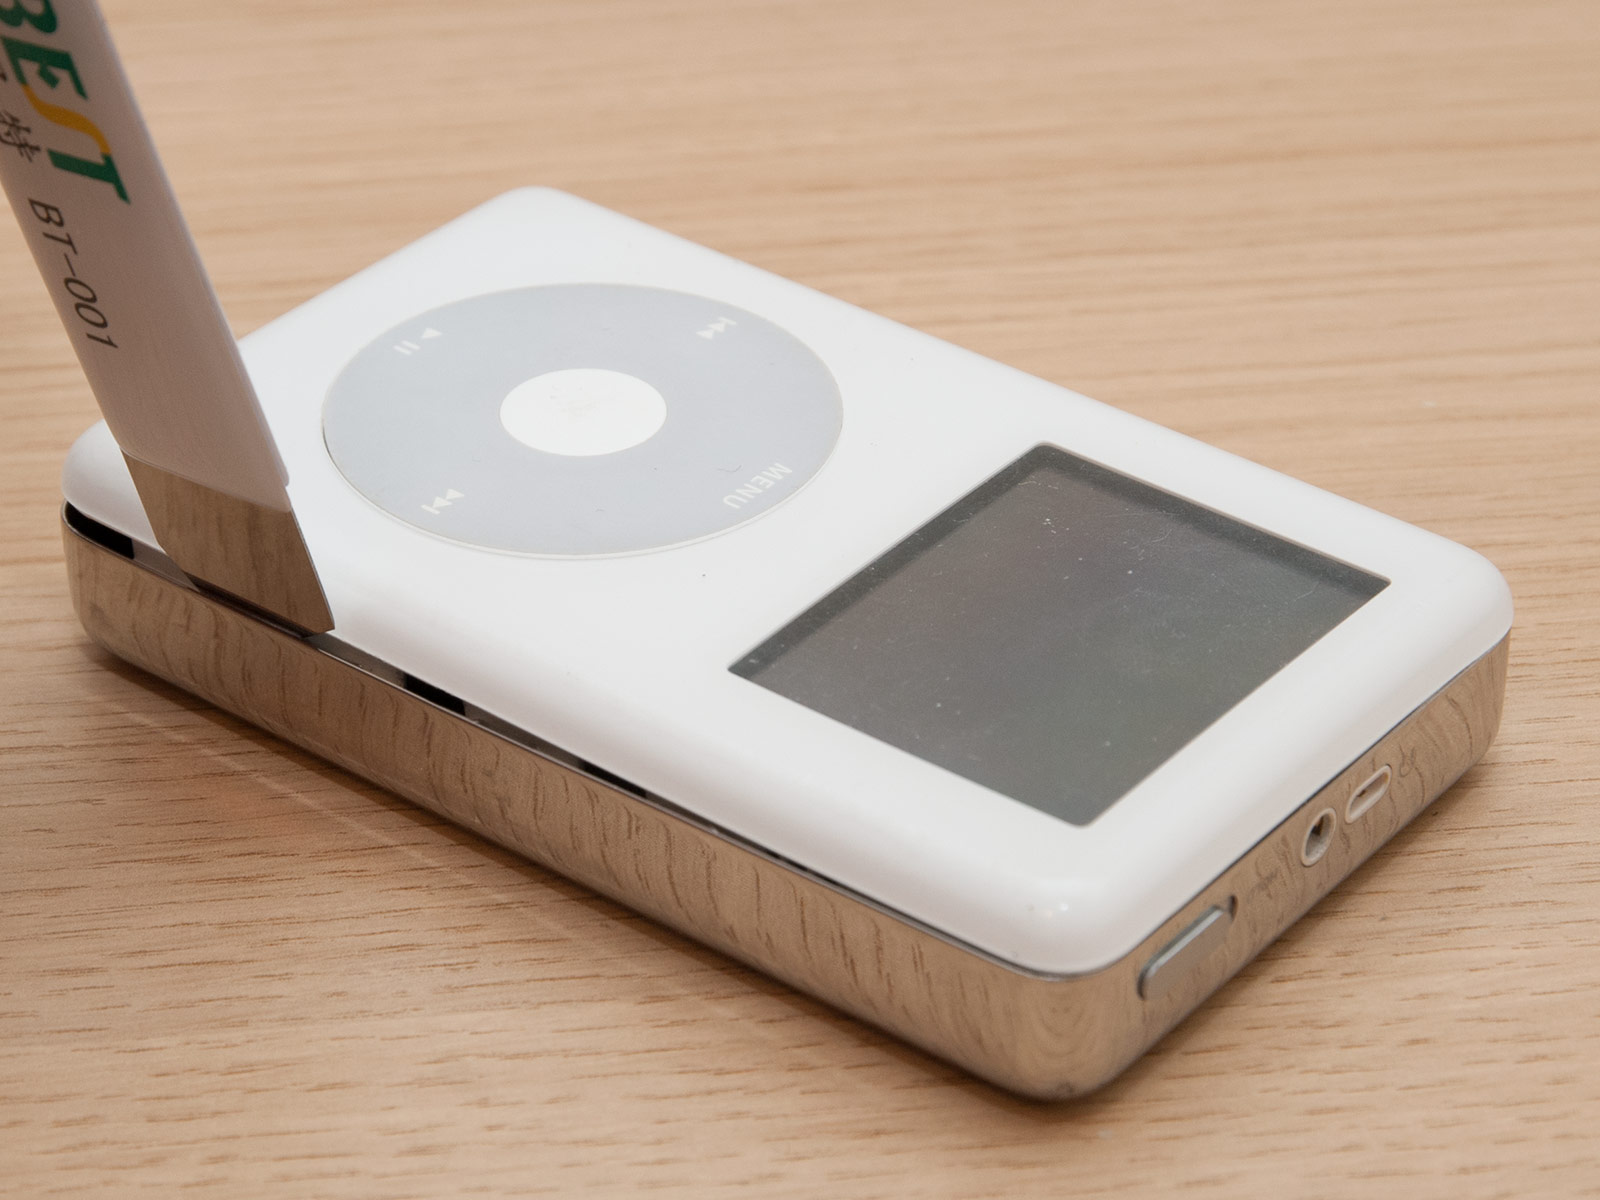 Give Your iPod Classic New Life with iFlash